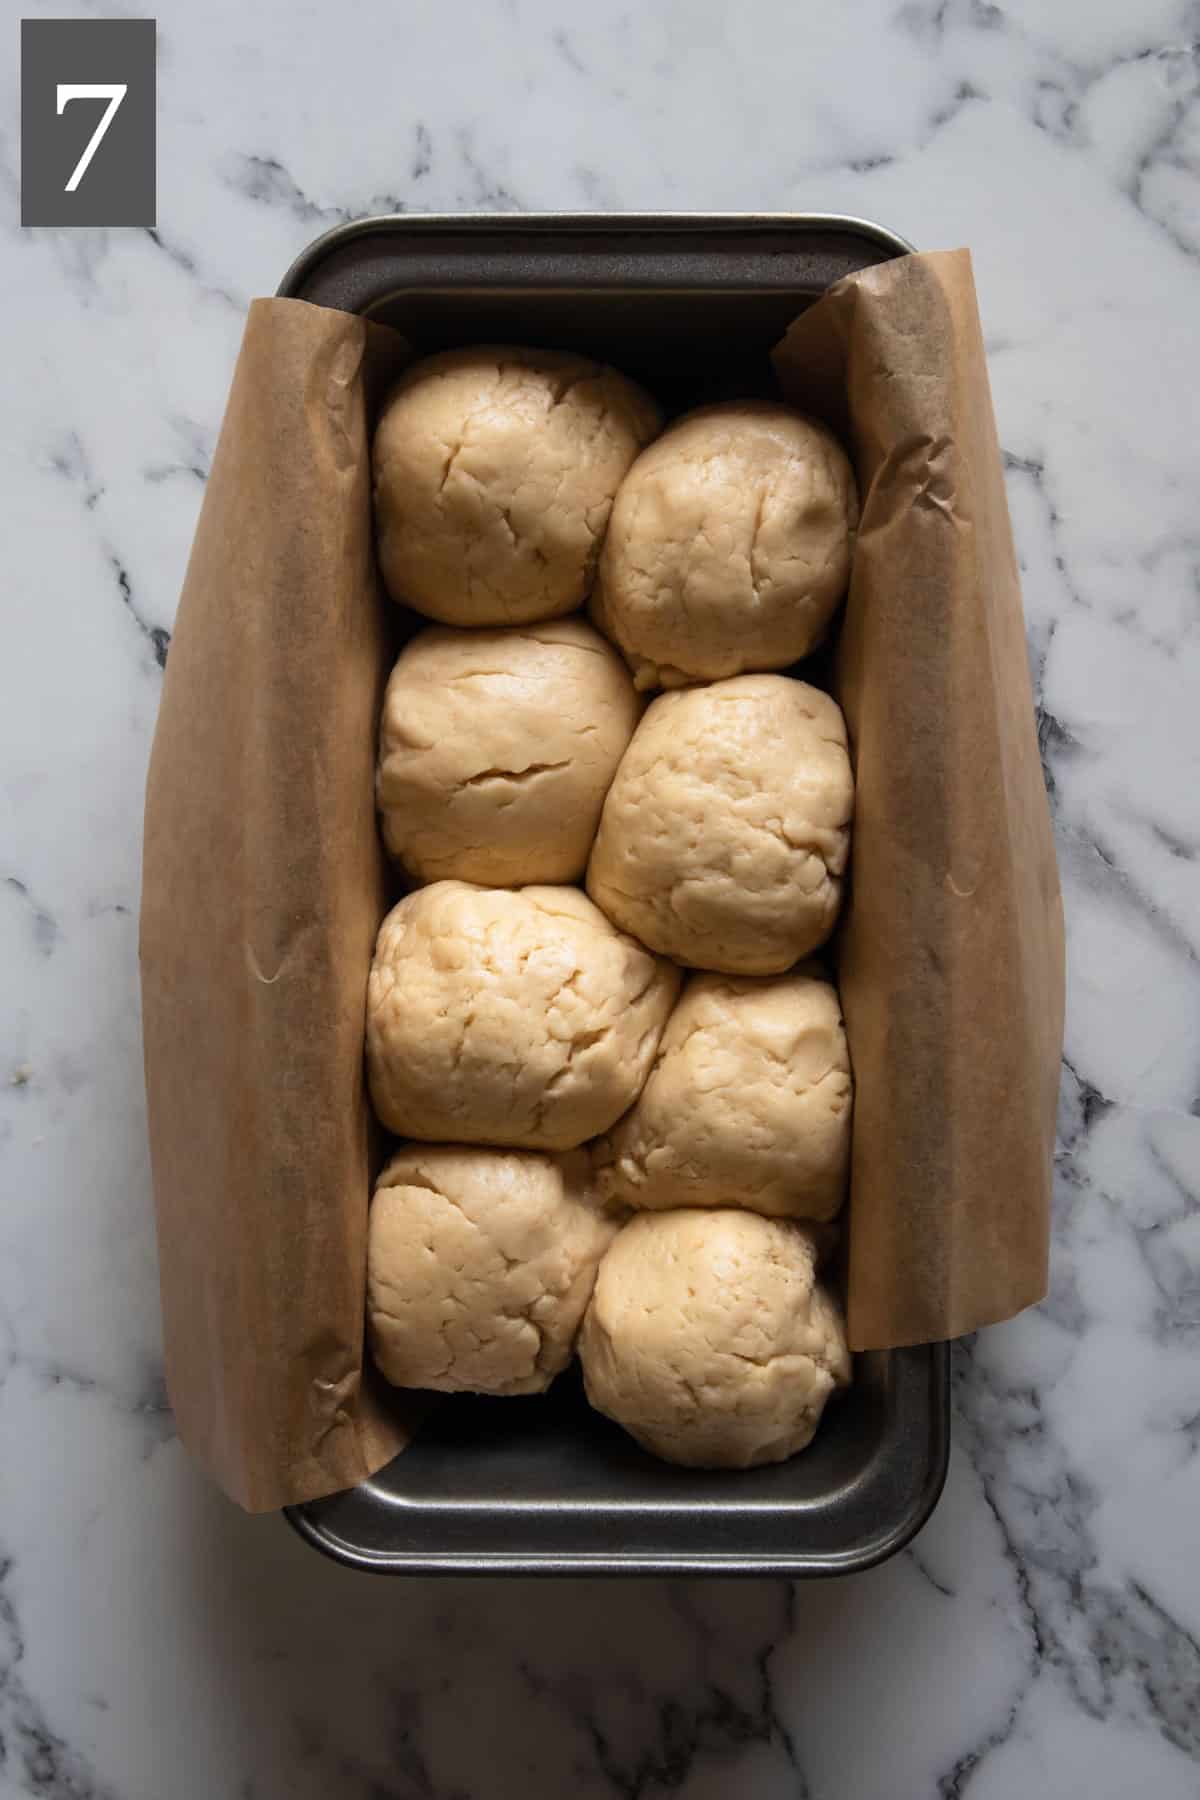 The dough balls arranged in a loaf tin in a zip zag manner.